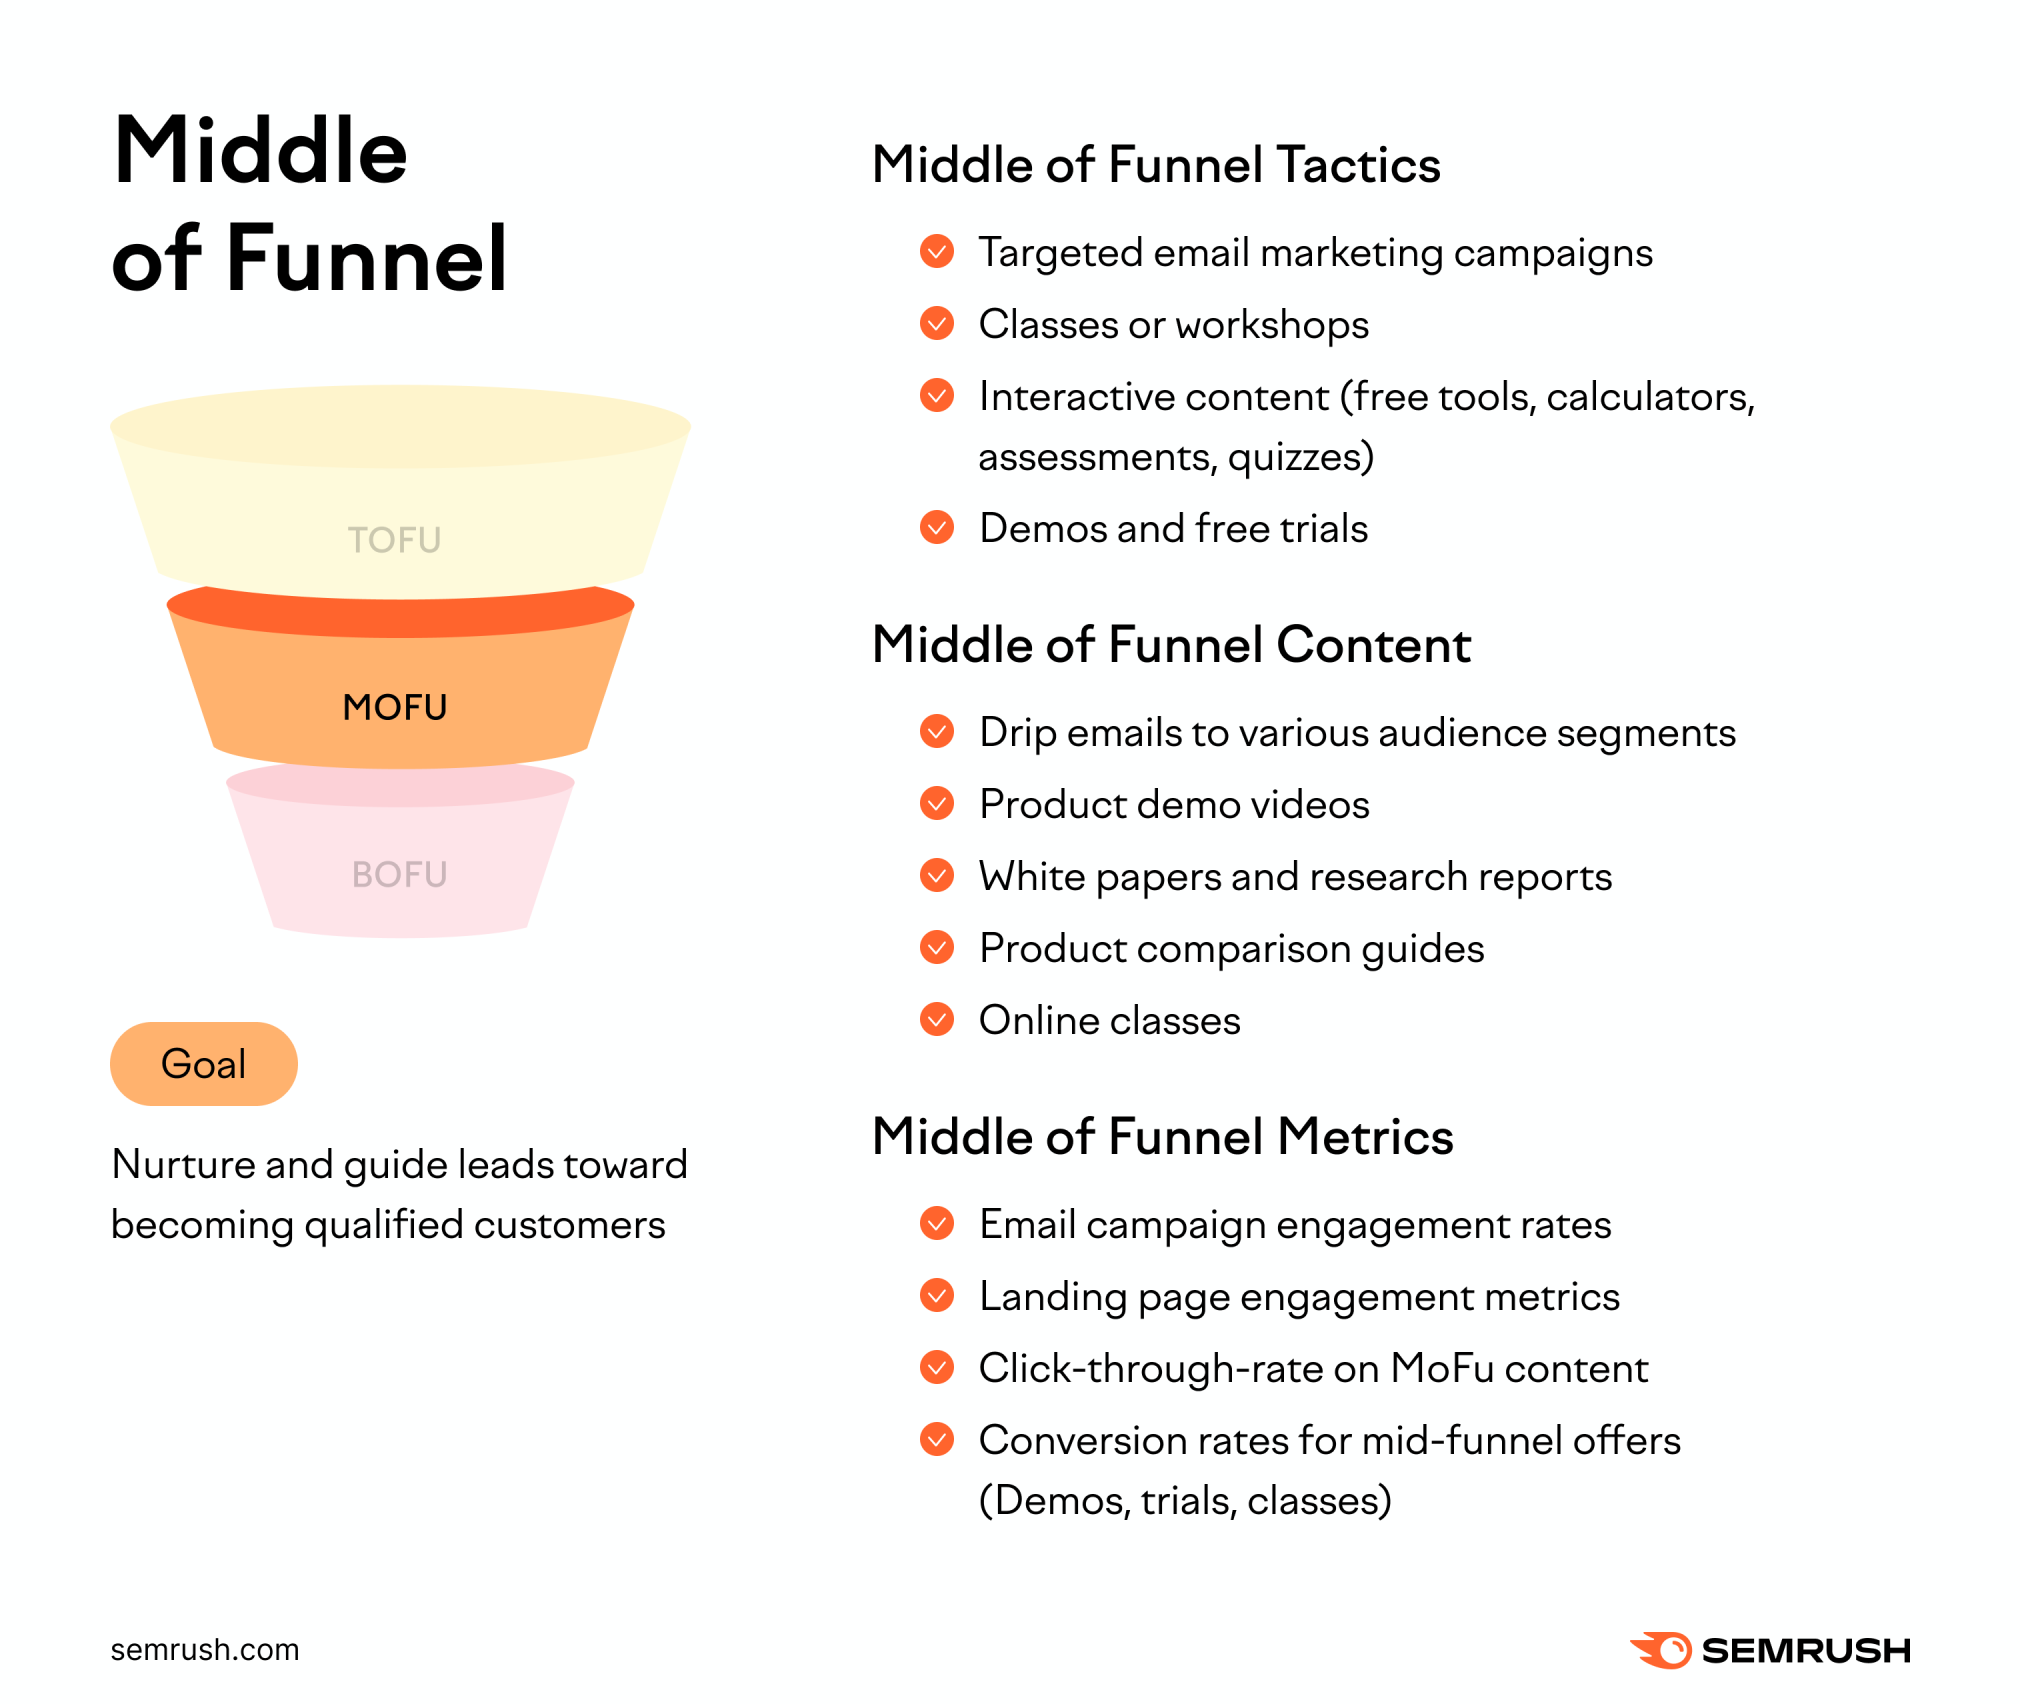 Middle of Conversion Funnel